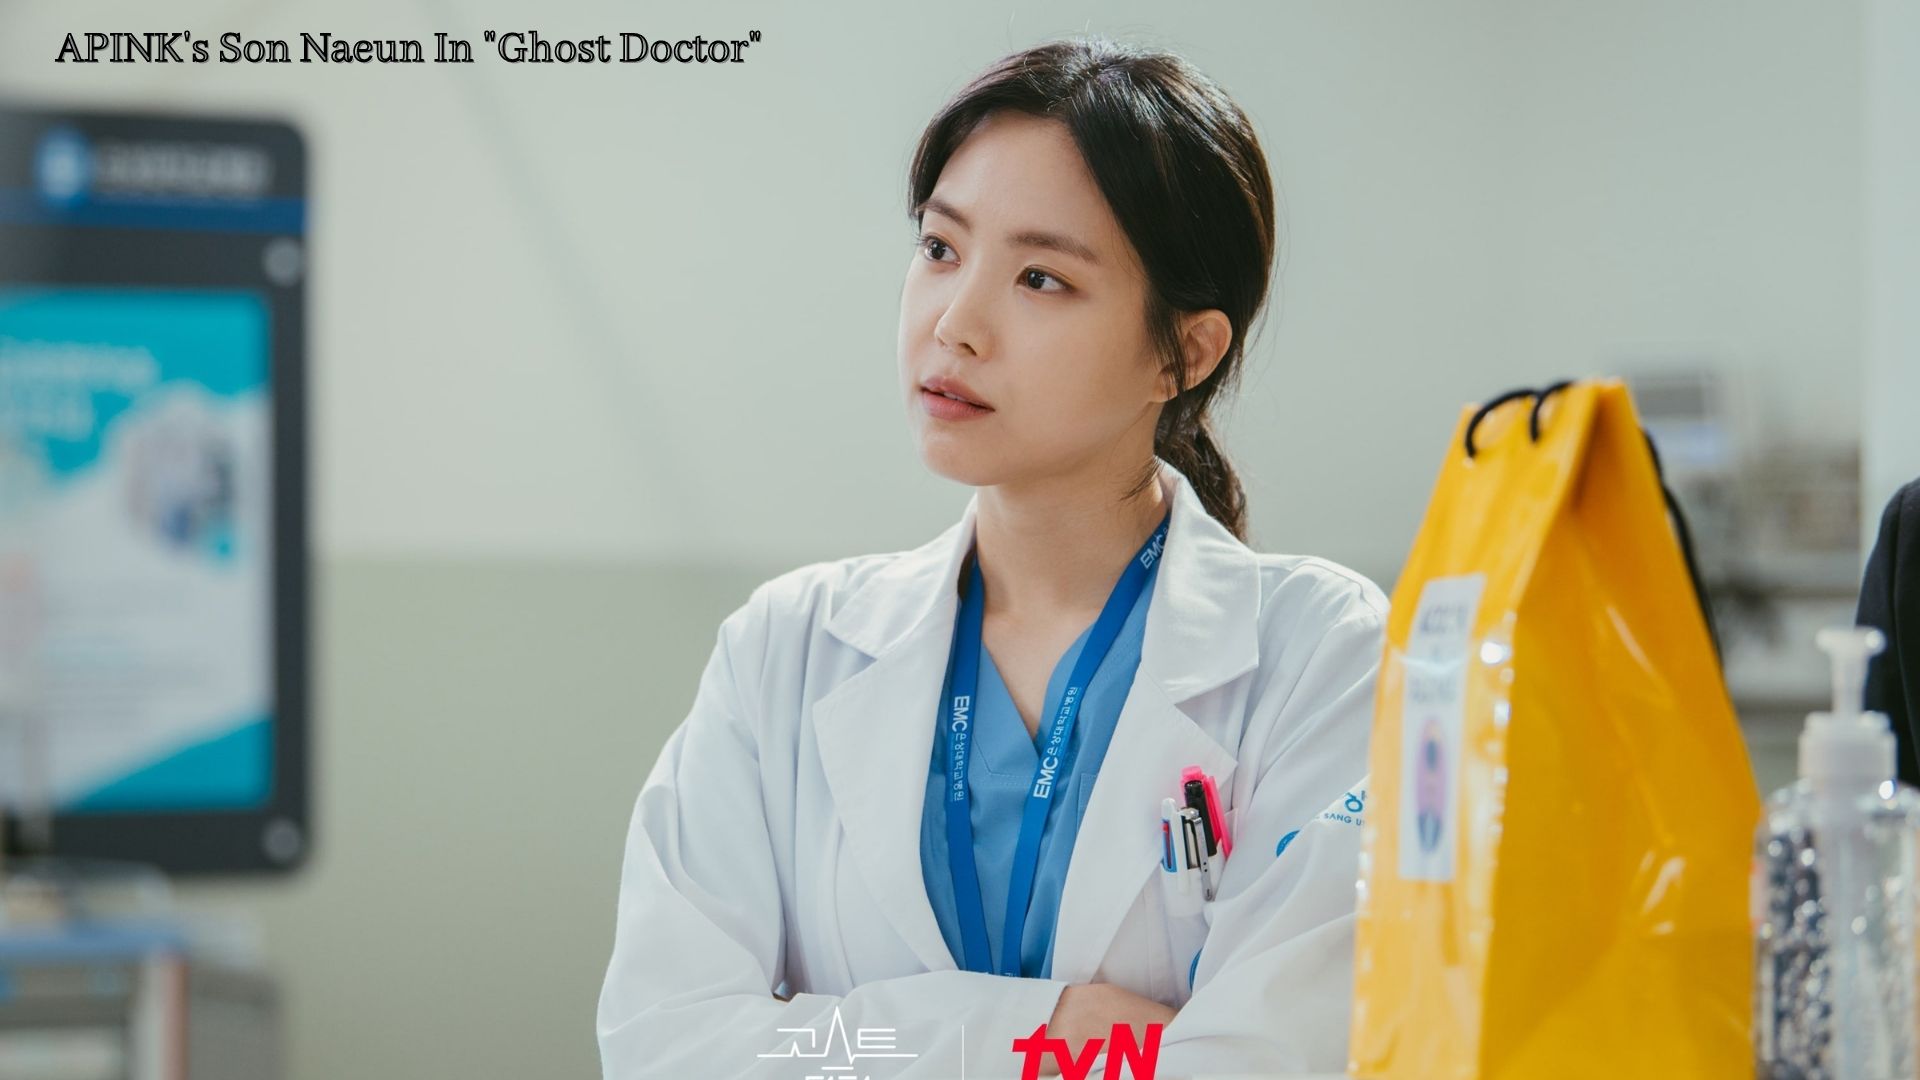 Son Naeun of APINK Transforms into A Medical Intern for Her Upcoming K-Drama “Ghost Doctor”